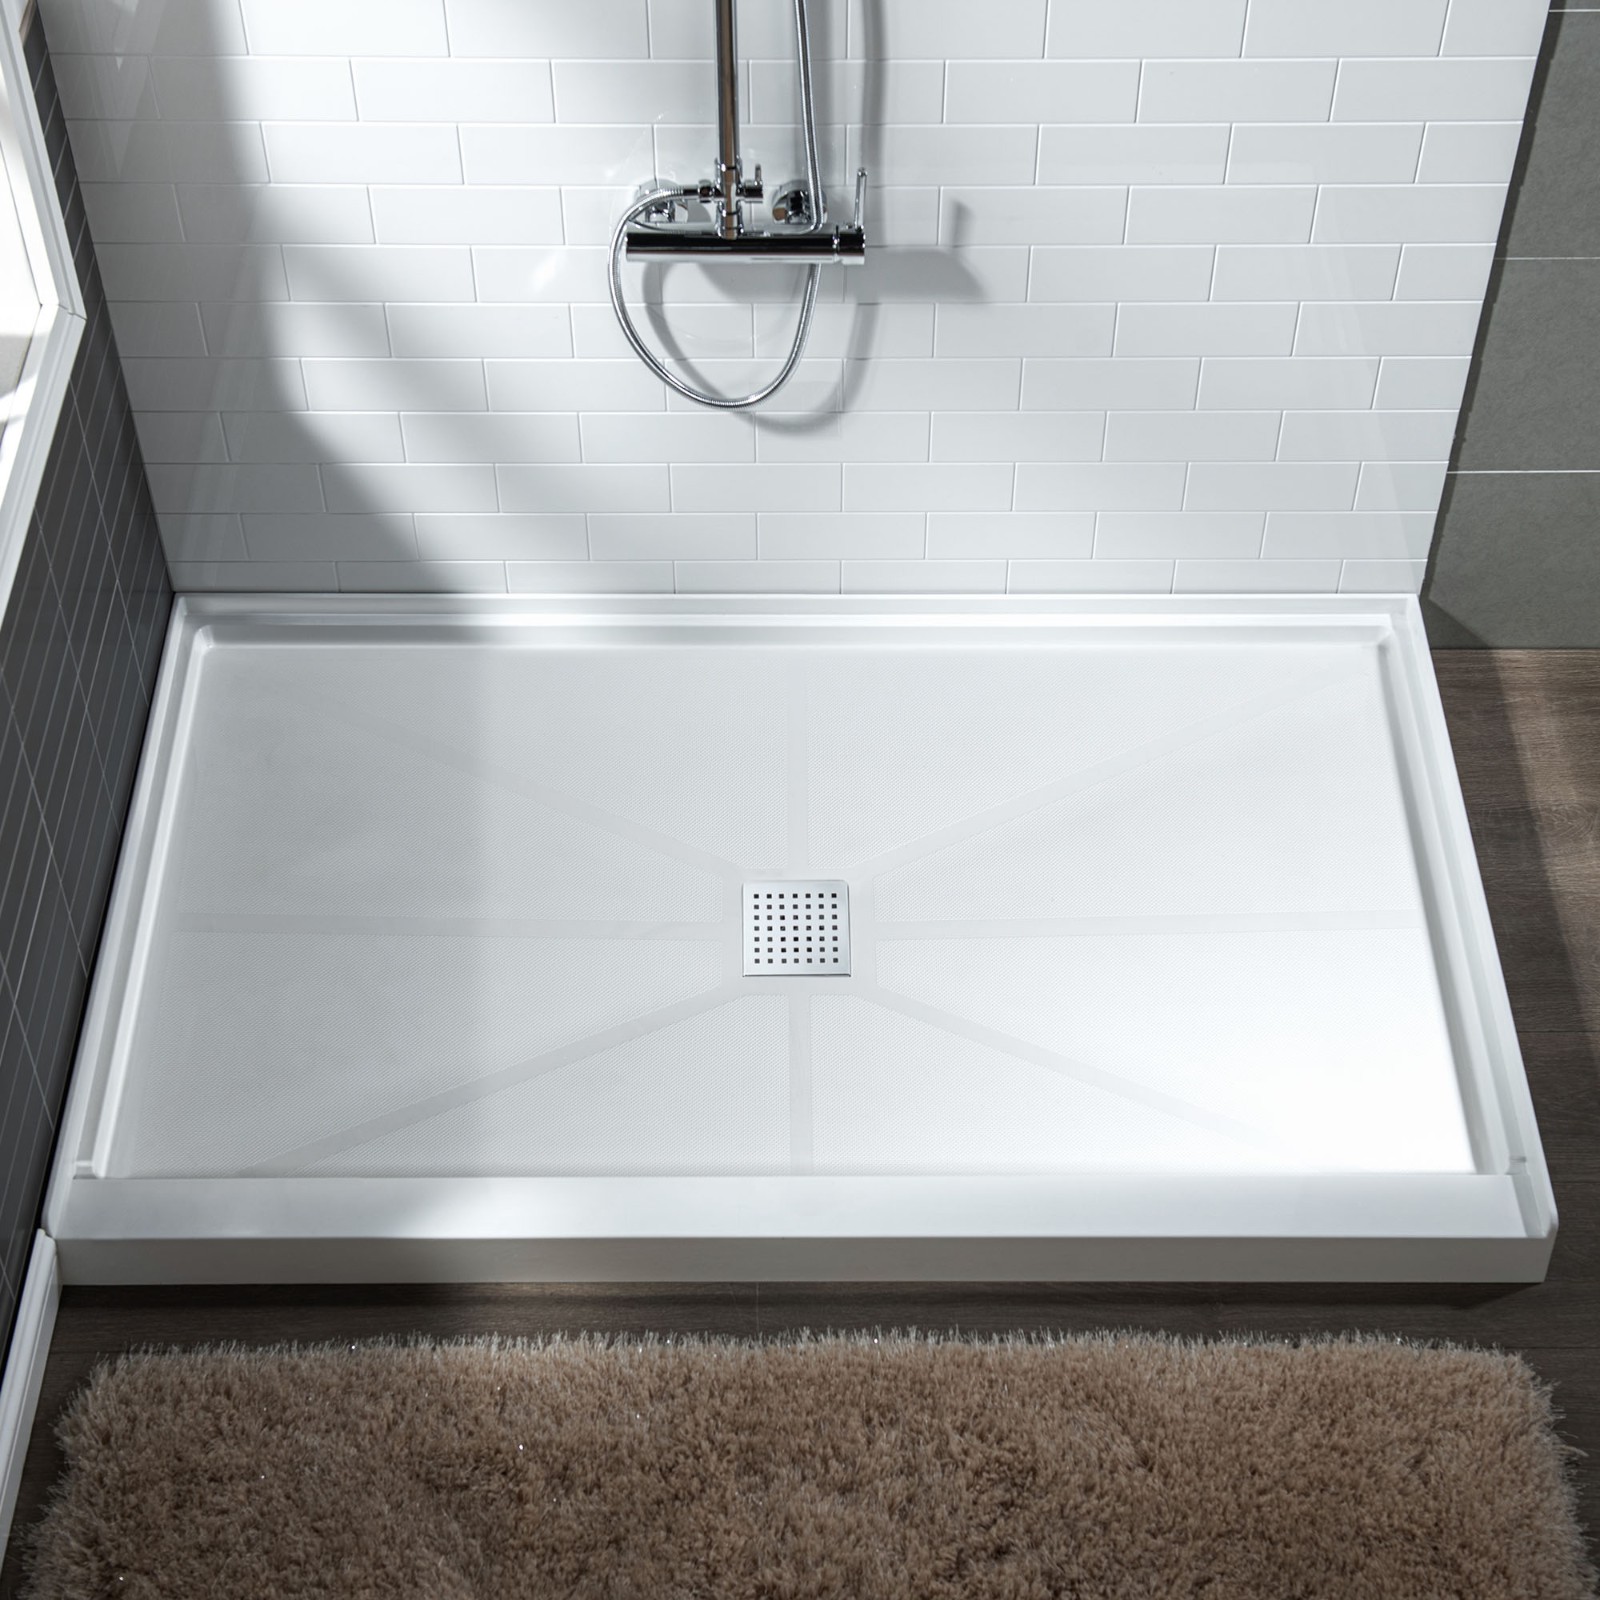  WOODBRIDGE SBR6030-1000C-CH SolidSurface Shower Base with Recessed Trench Side Including  Chrome Linear Cover, 60